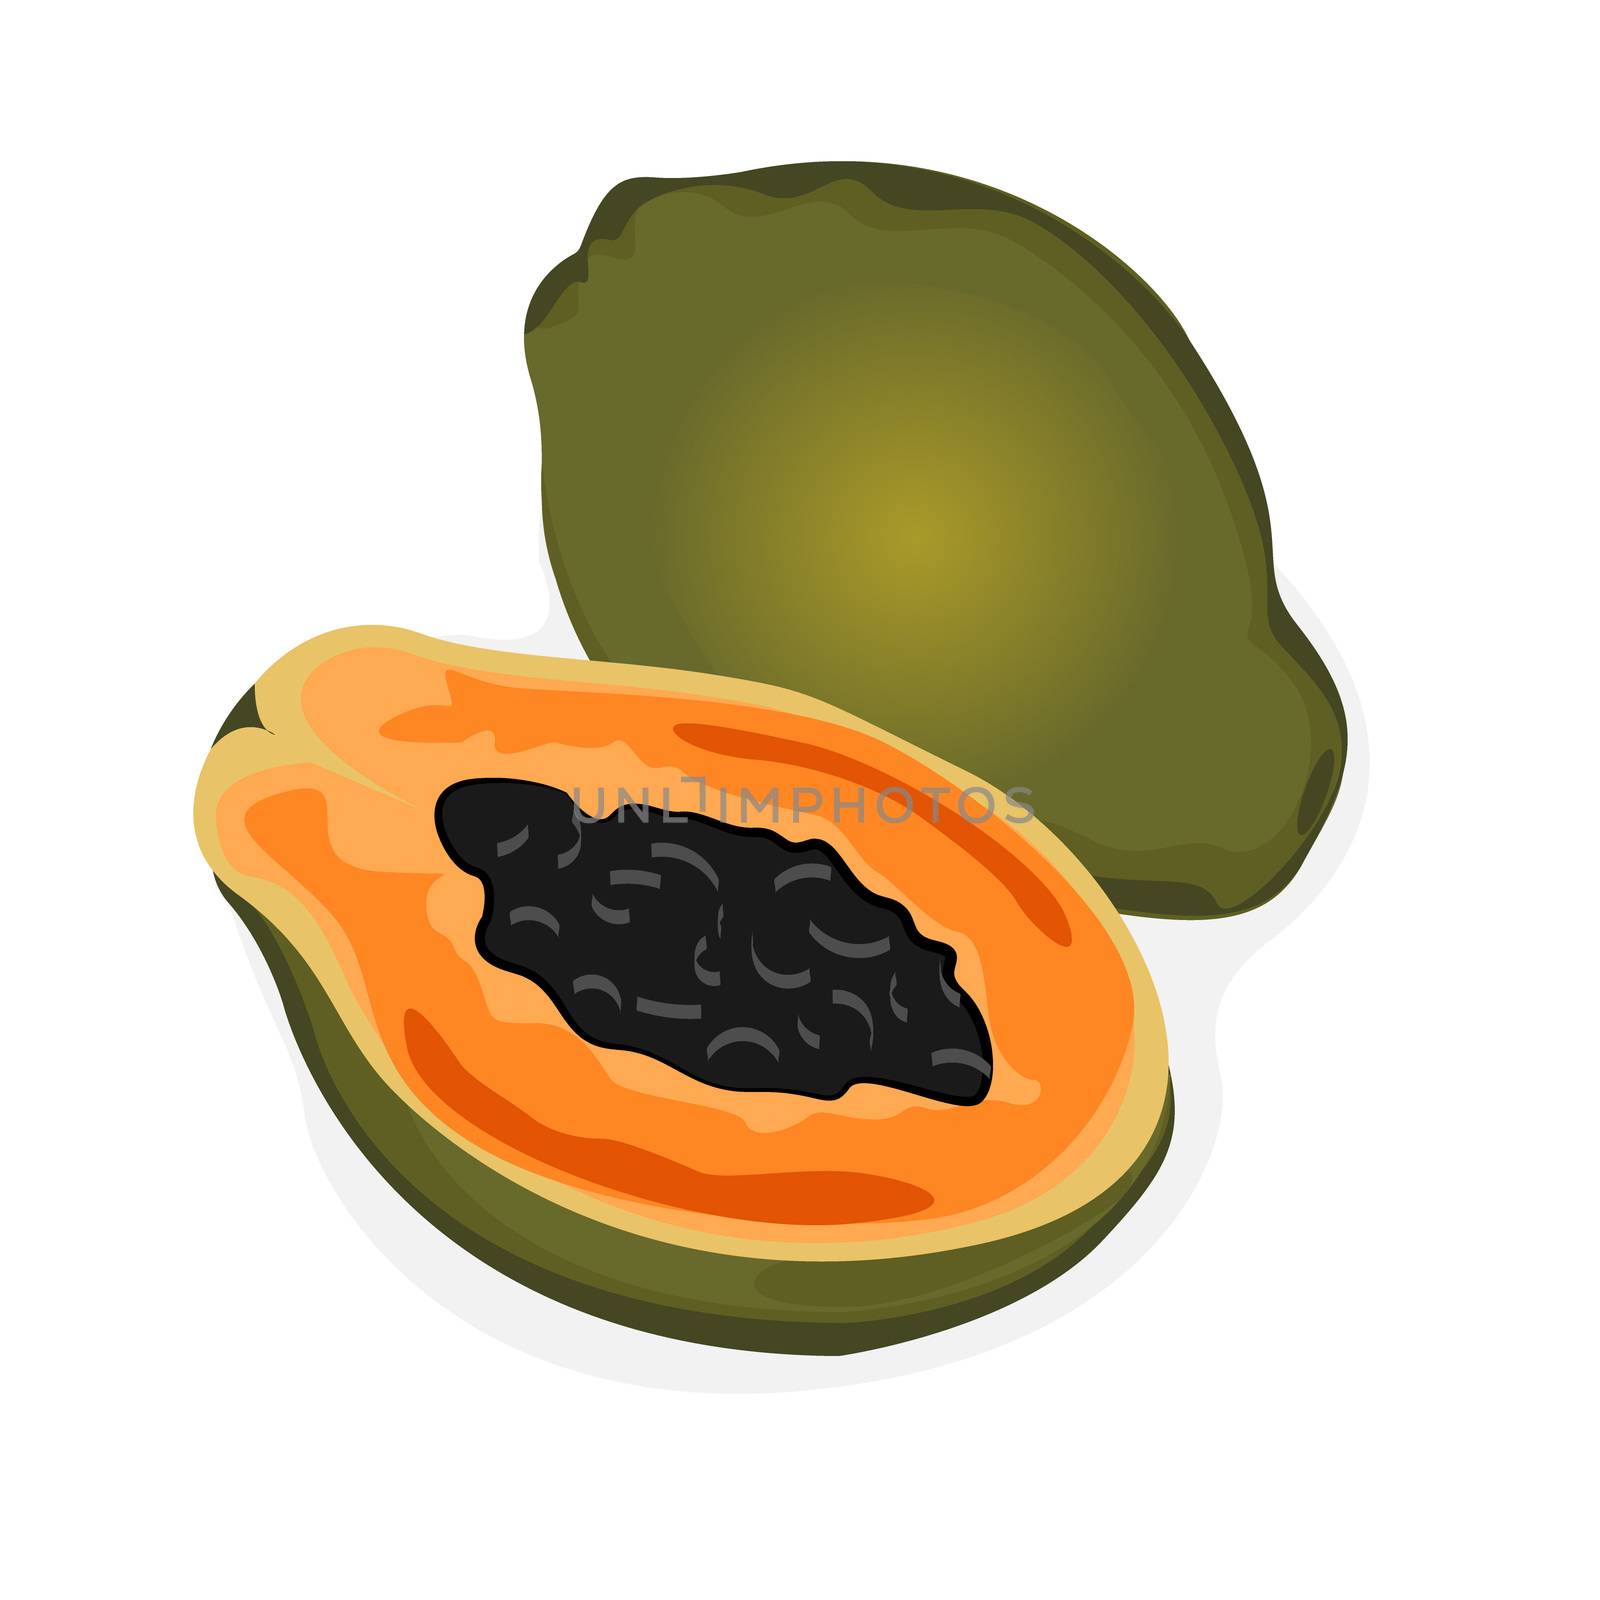 Papaya and a half vector illustration on a white background isolated